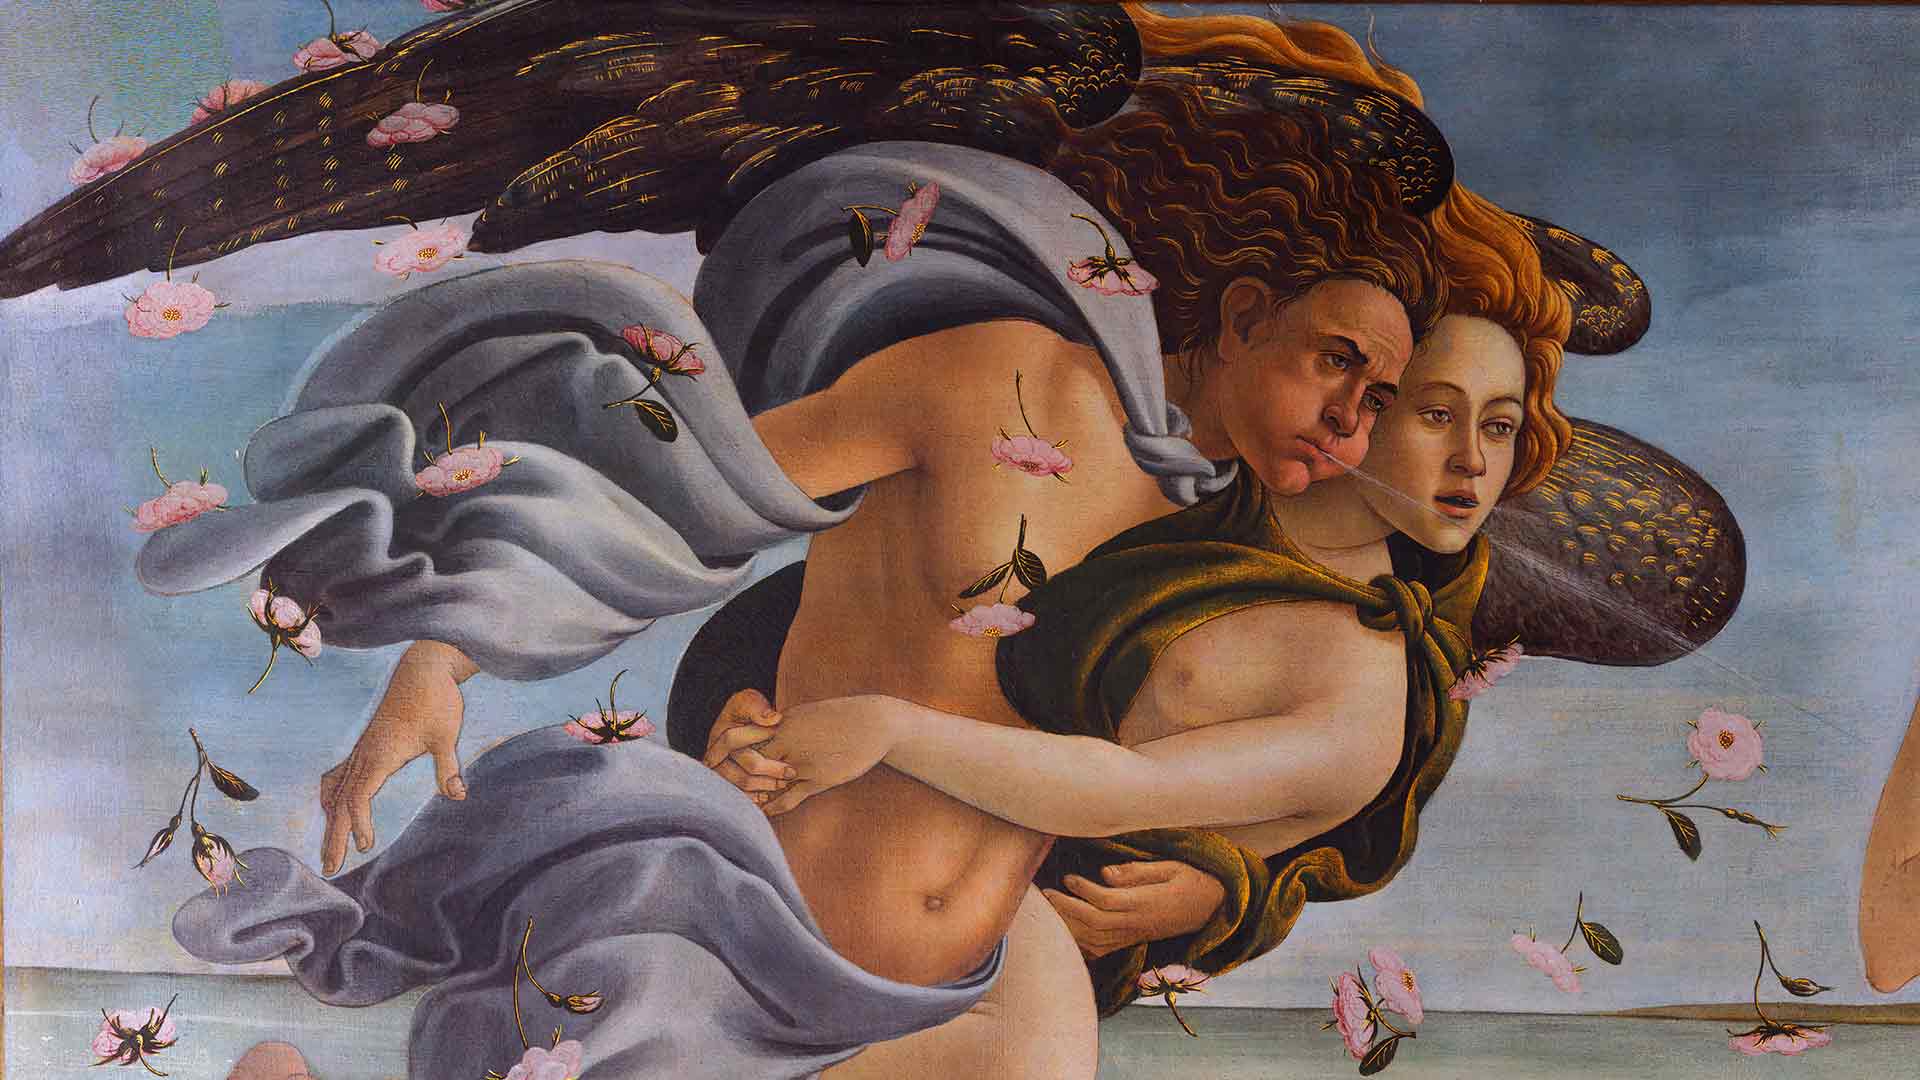 Details of the Gods of Wind in The Birth of Venus by Sandro Botticelli at the Uffizi Gallery, Florence, Italy (CC0 1.0)